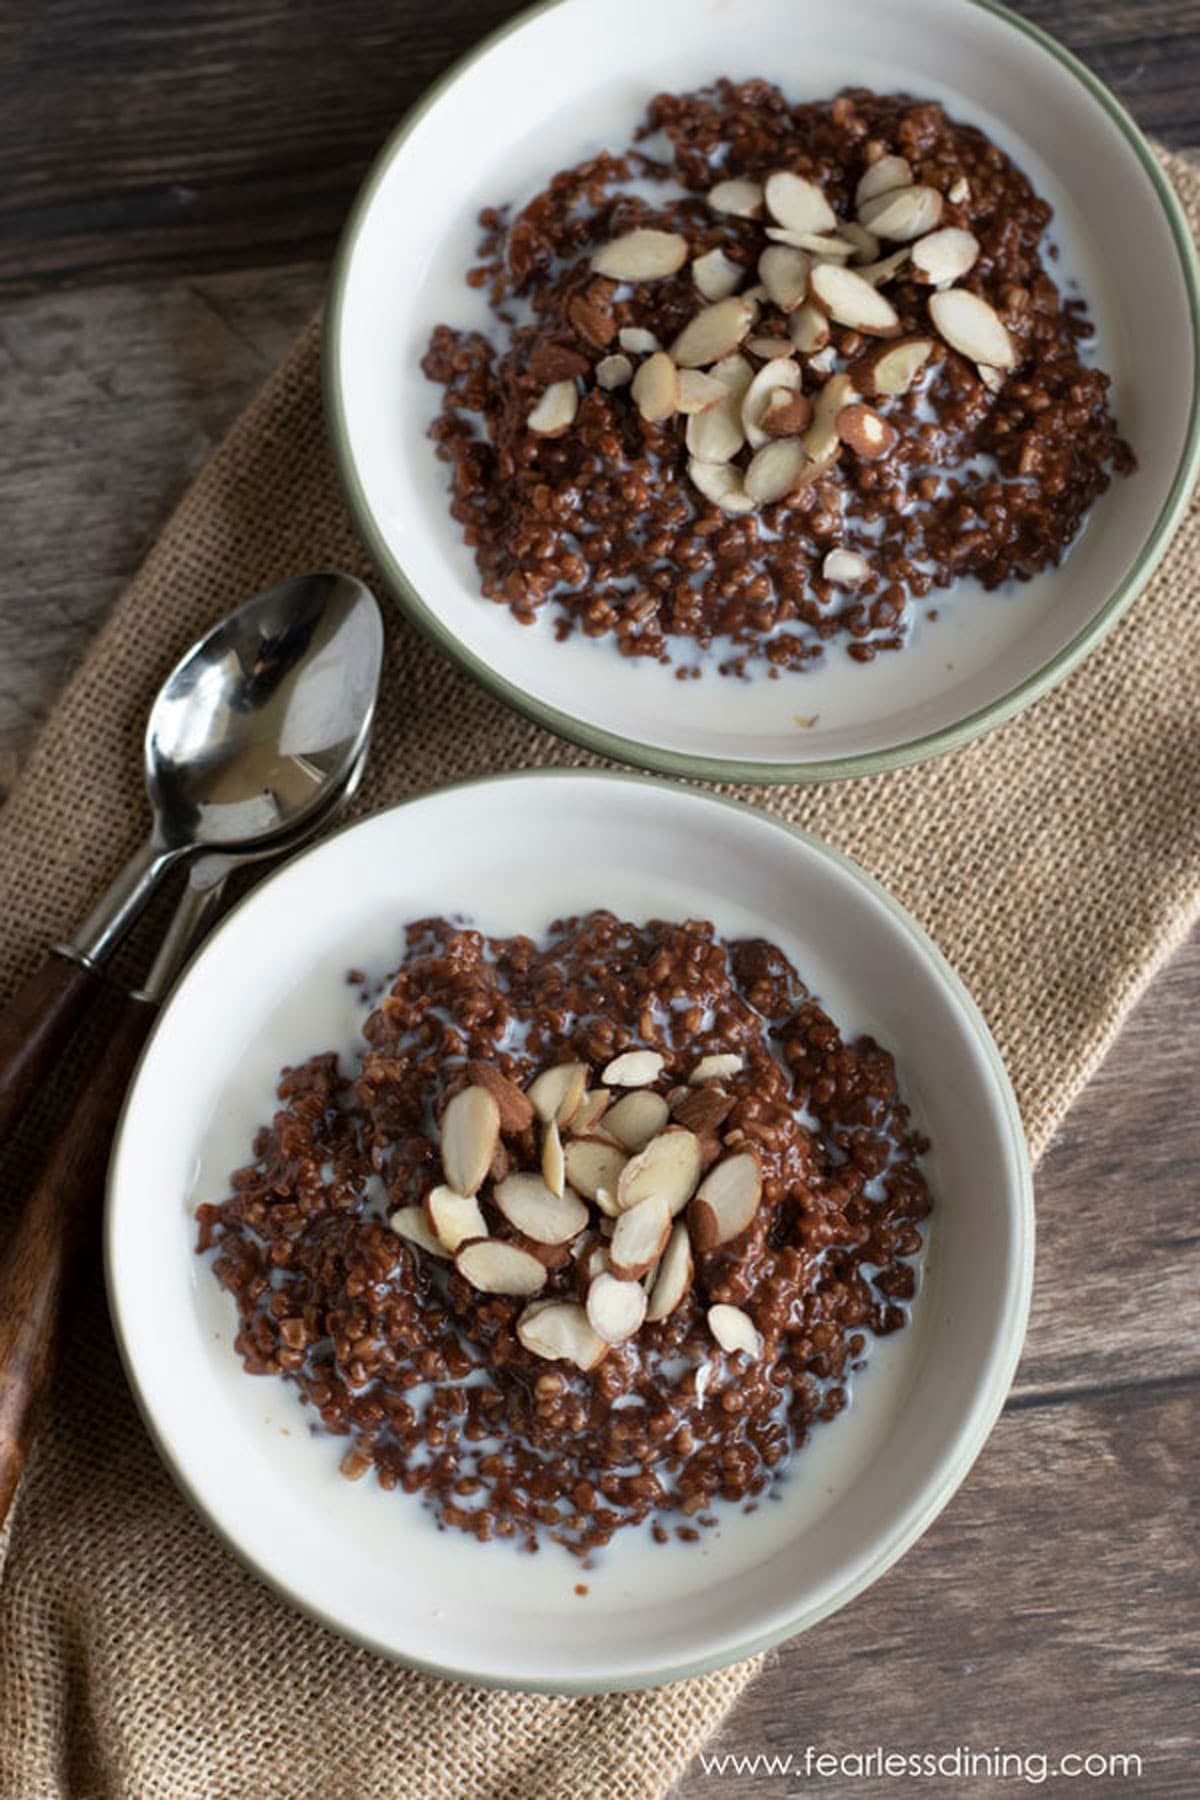 two bowls filled with chocolate steel cut oats. Both are topped with slivered almonds